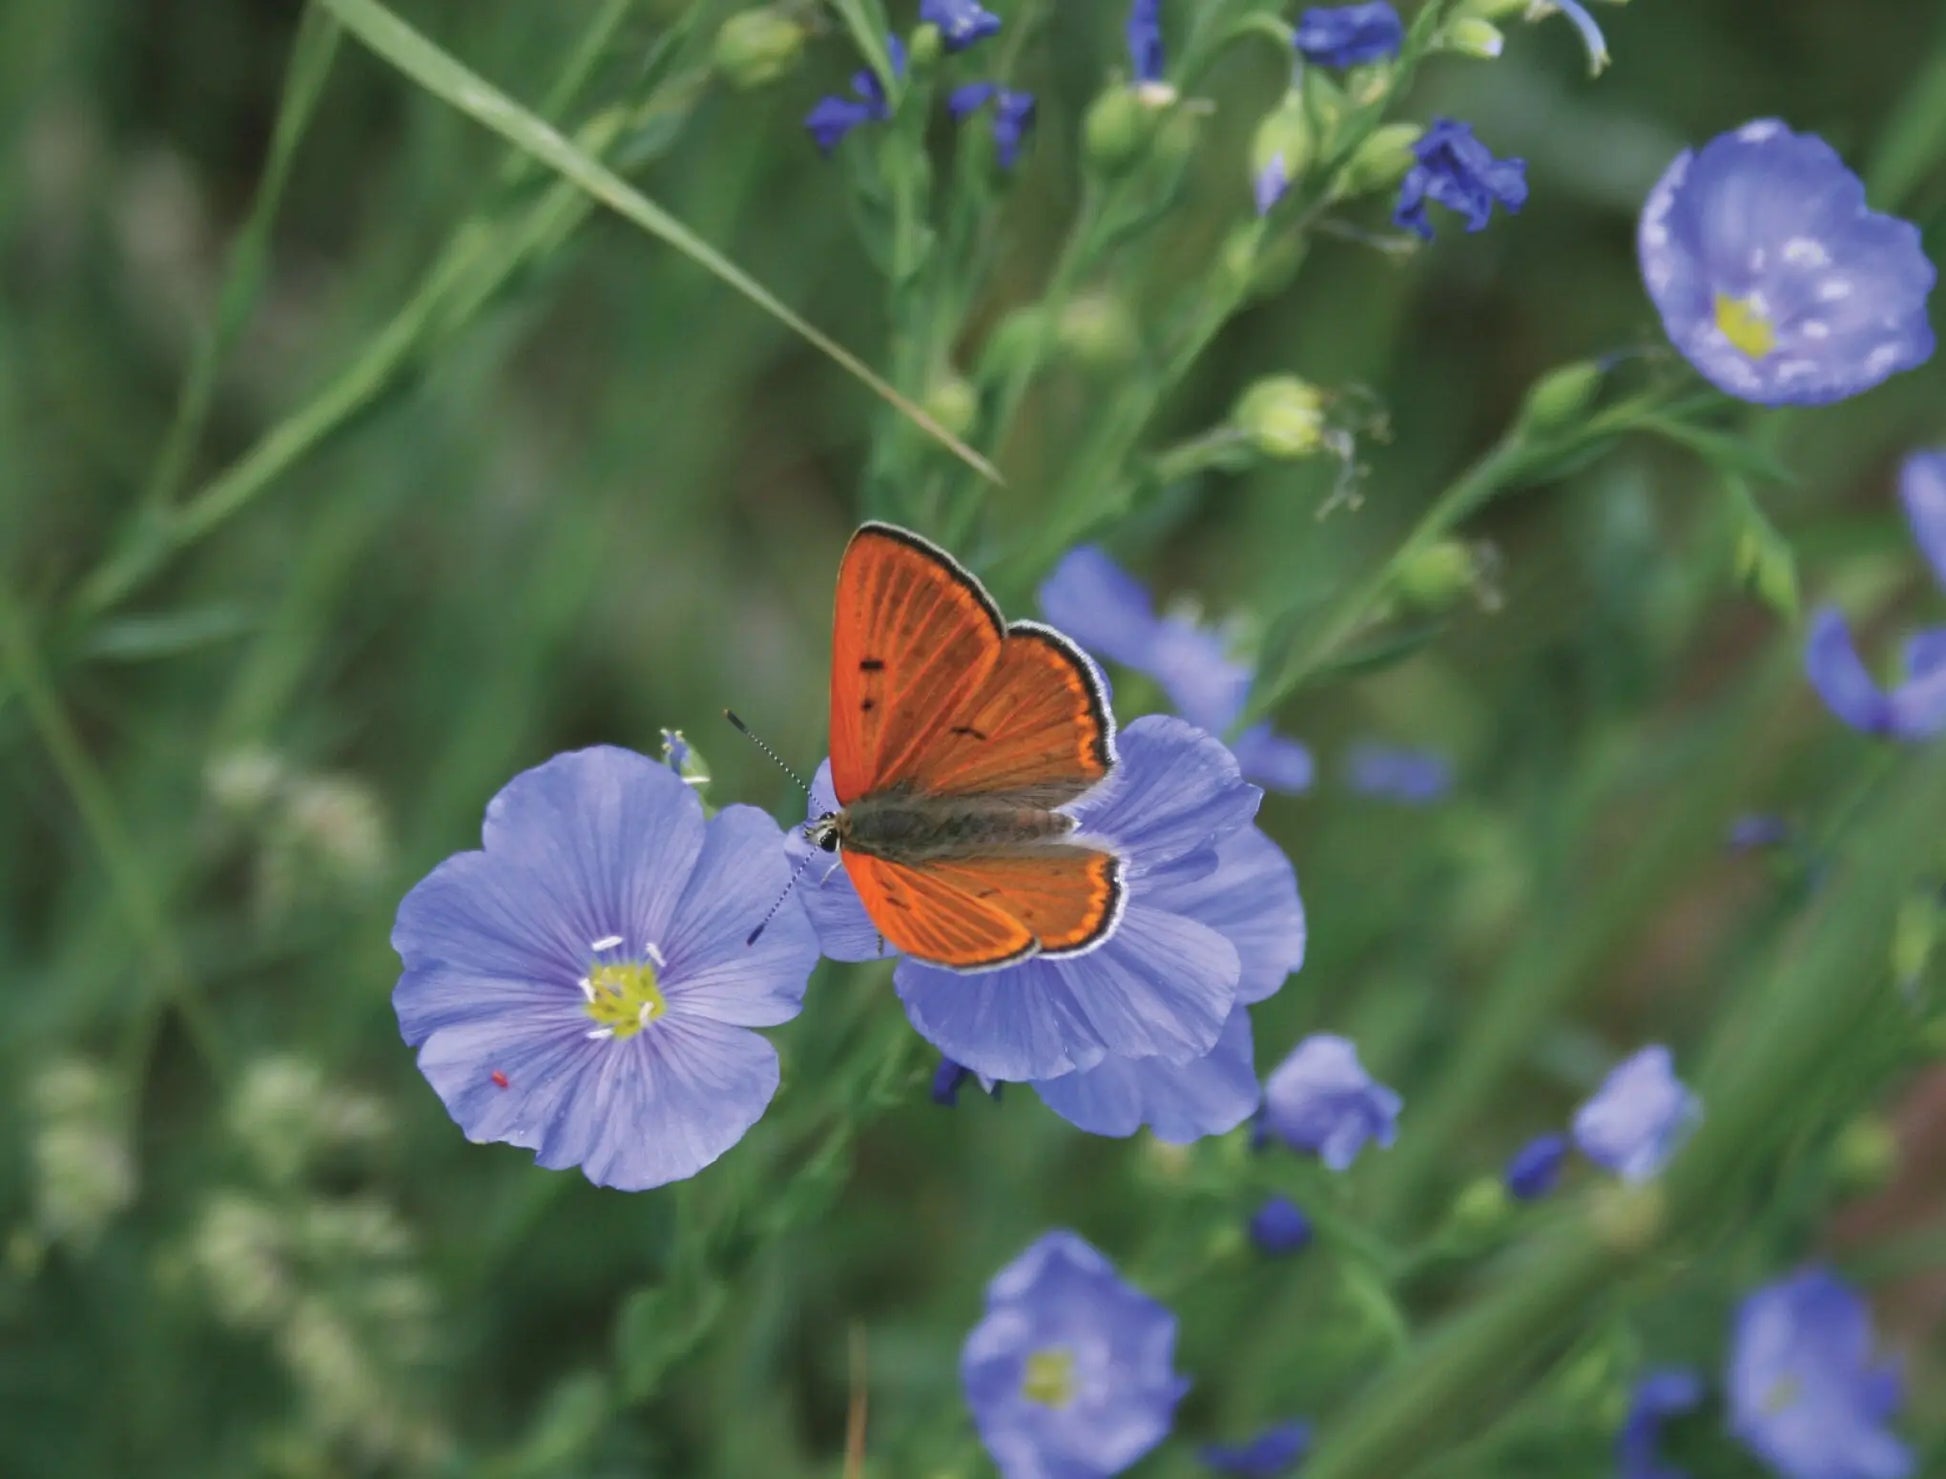 A close-up photo of a colorful butterfly with delicate wings resting on a vibrant blue flax wildflower in a vast, green meadow in Aspen, Colorado.  